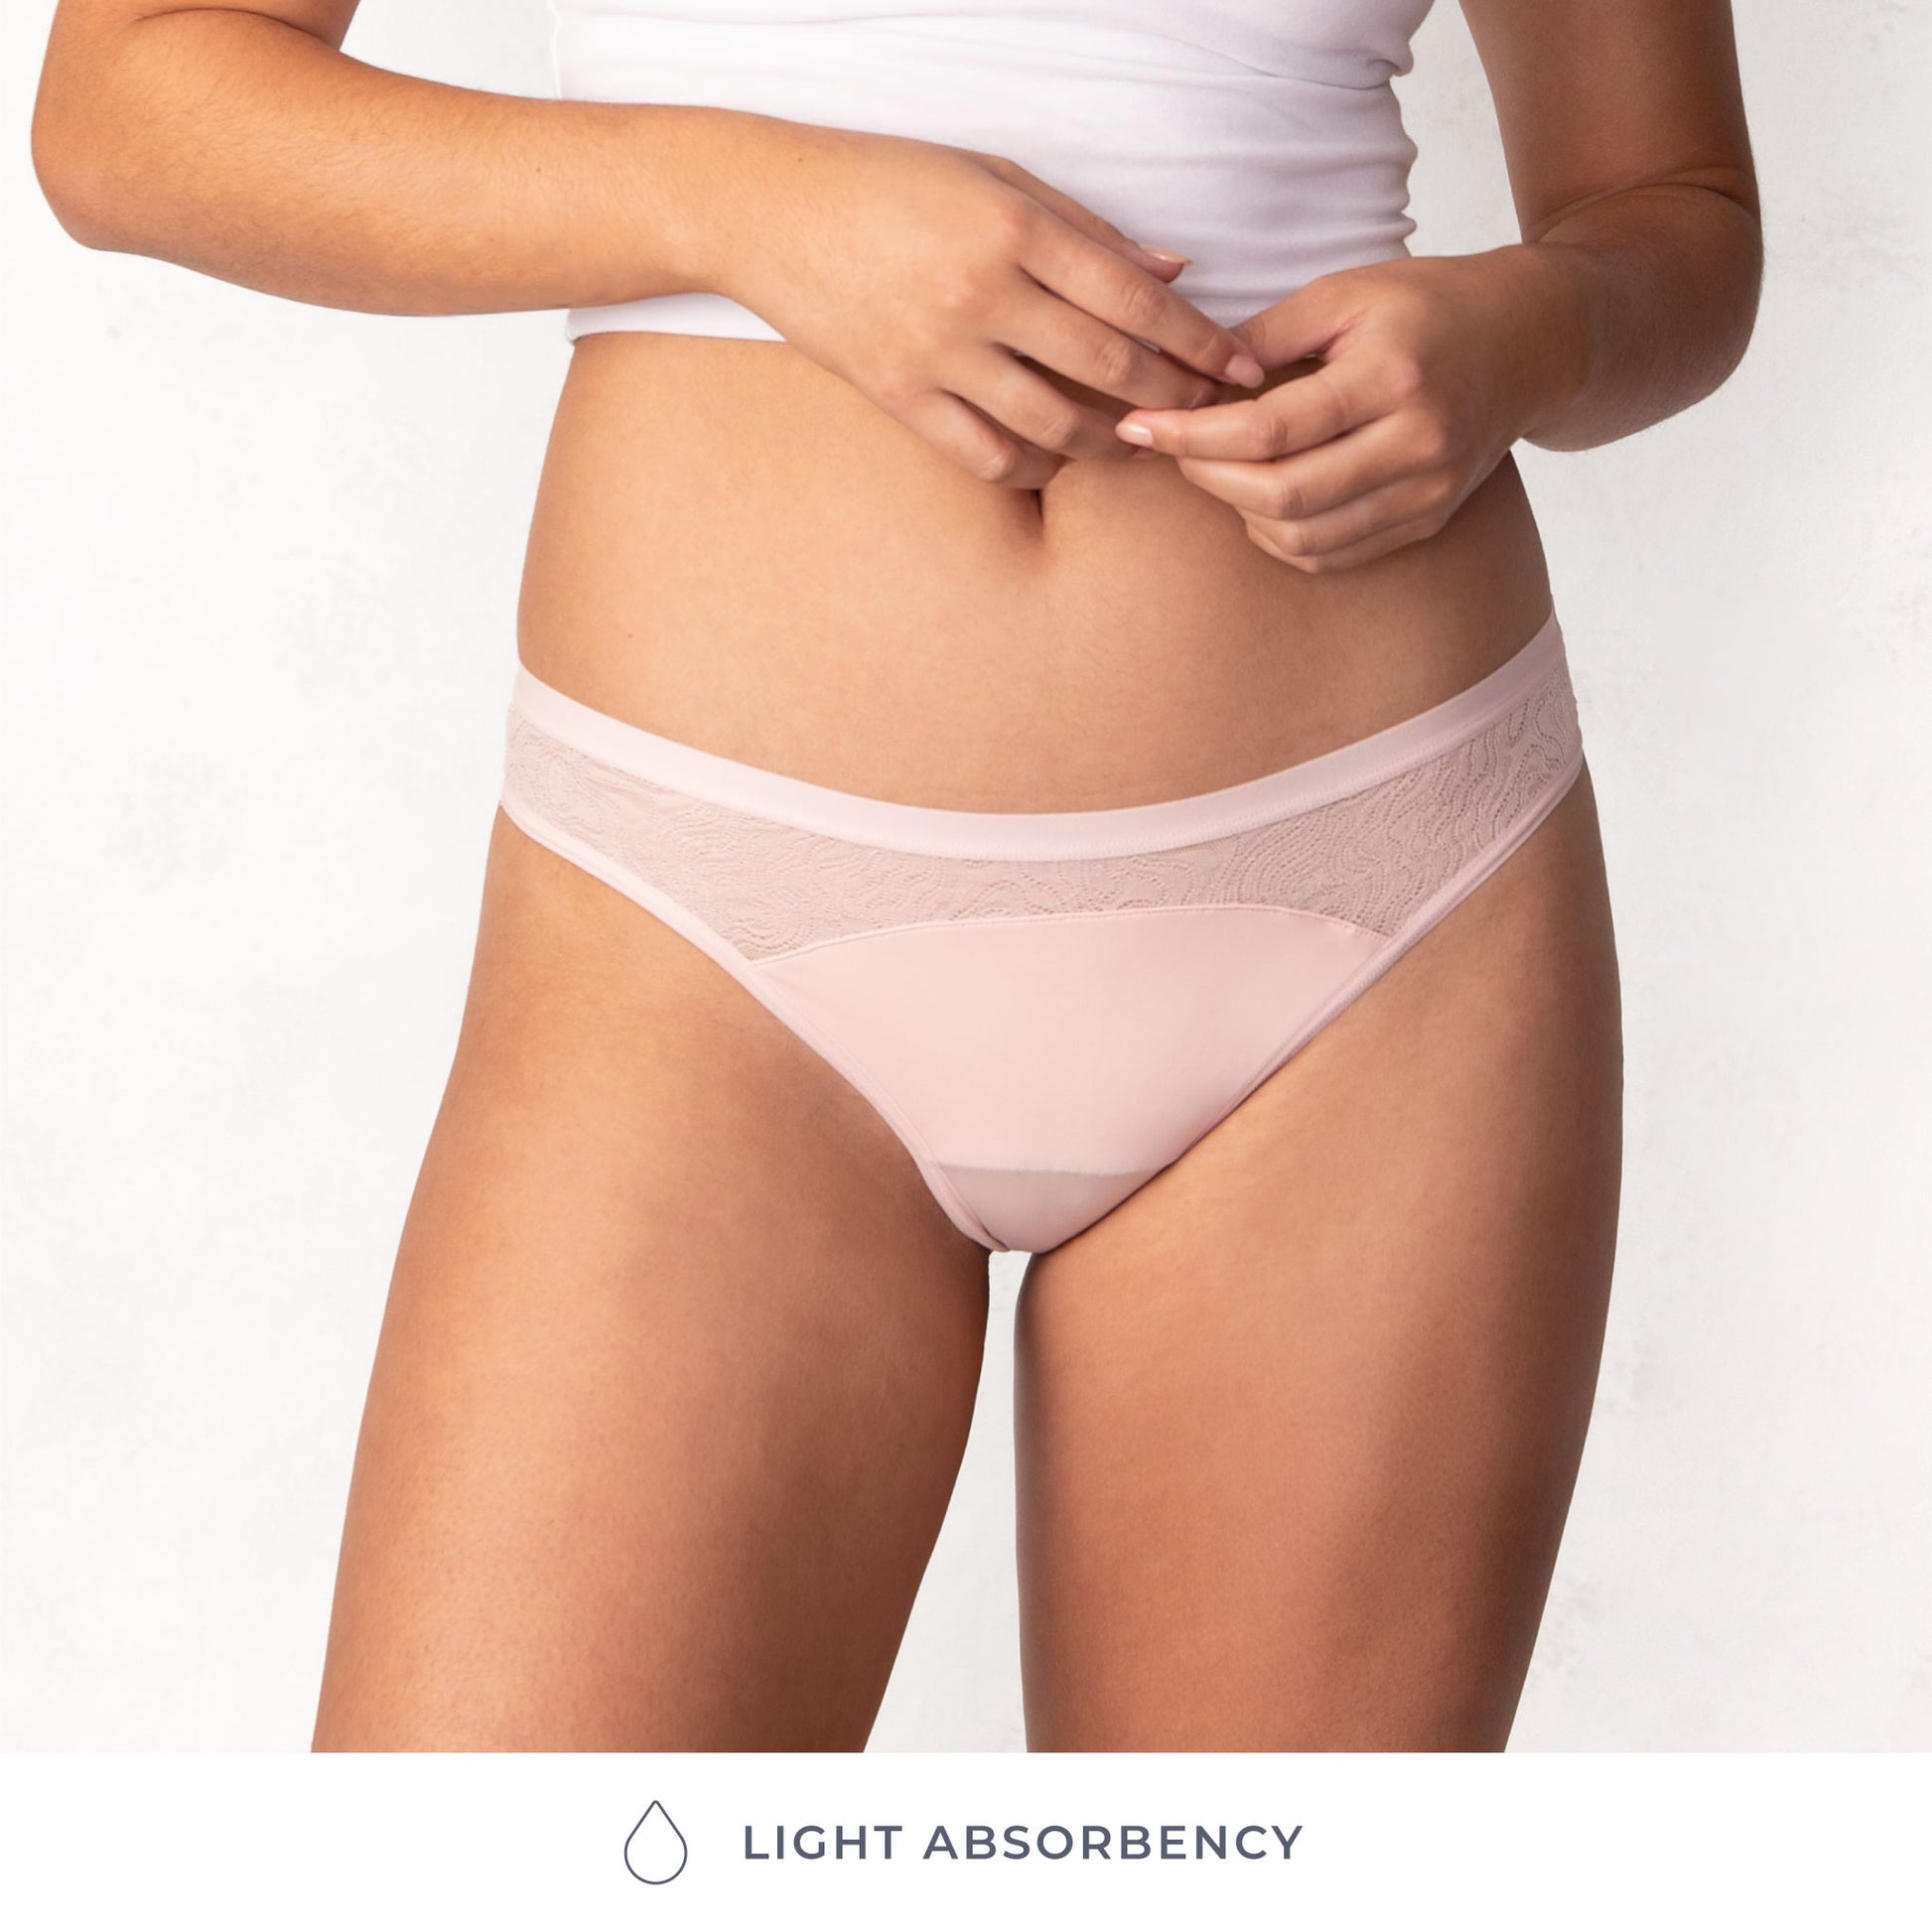 Period Panty Light Absorbency - Thong - Female Engineering